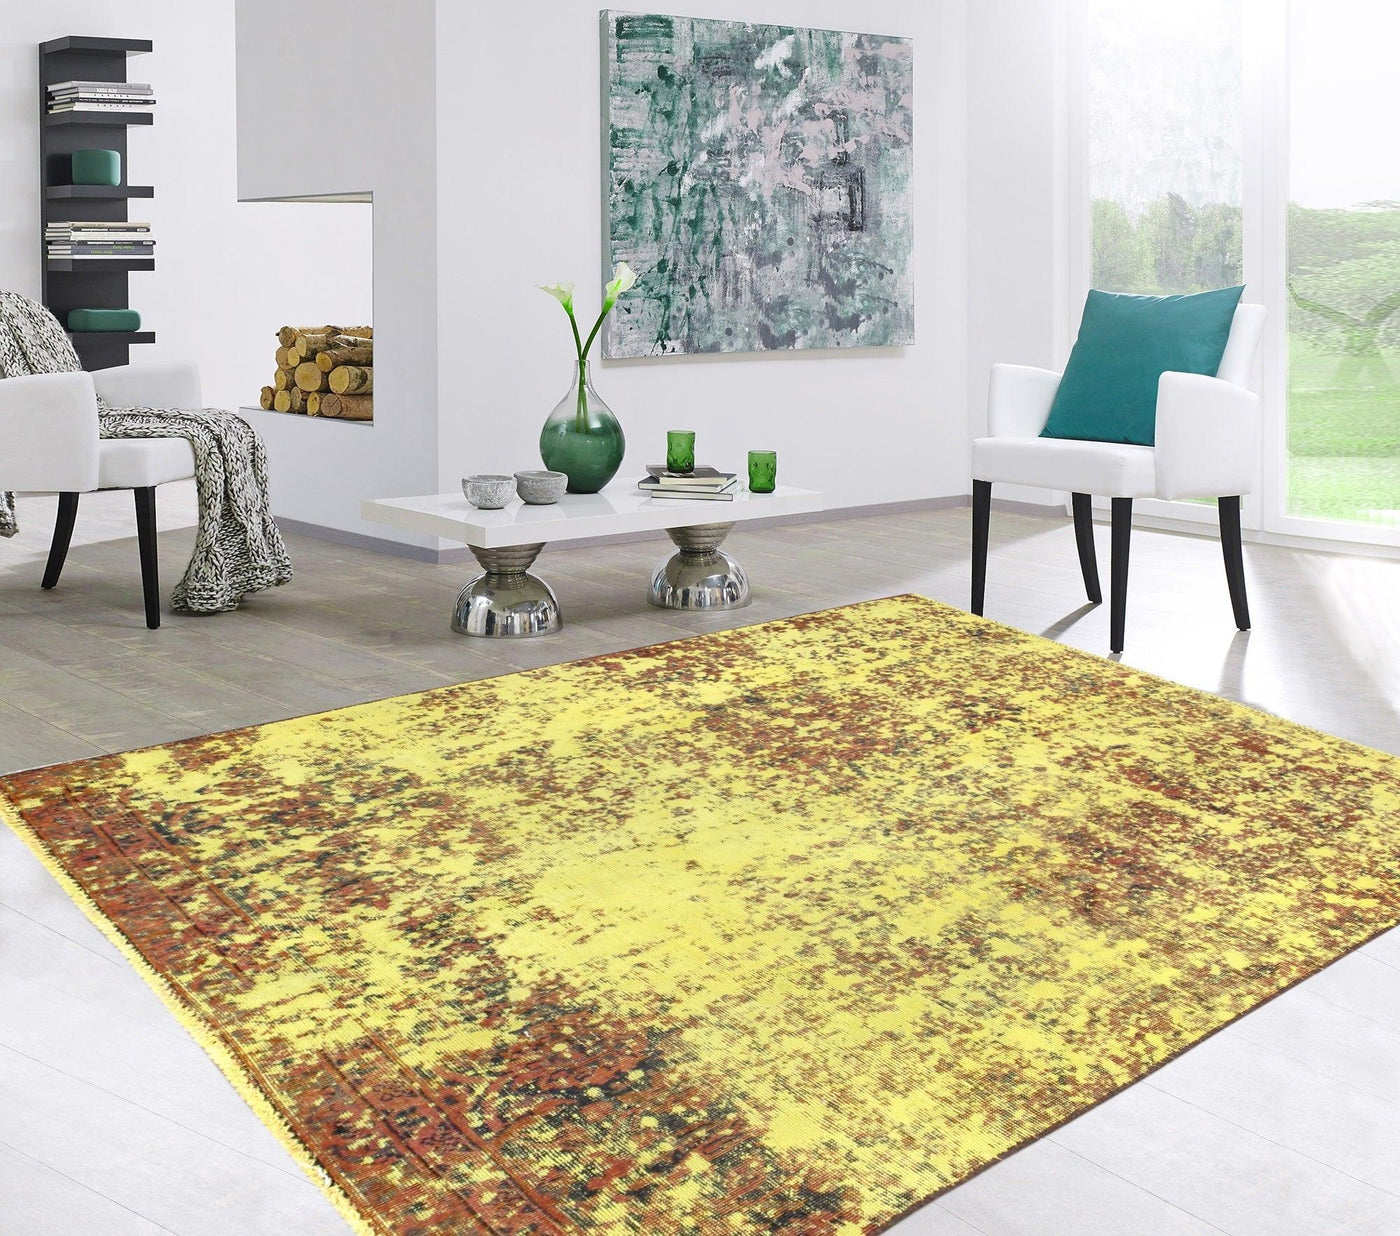 Canvello Vintage Overdyed Yellow Area Rug - 4' X 4'4"